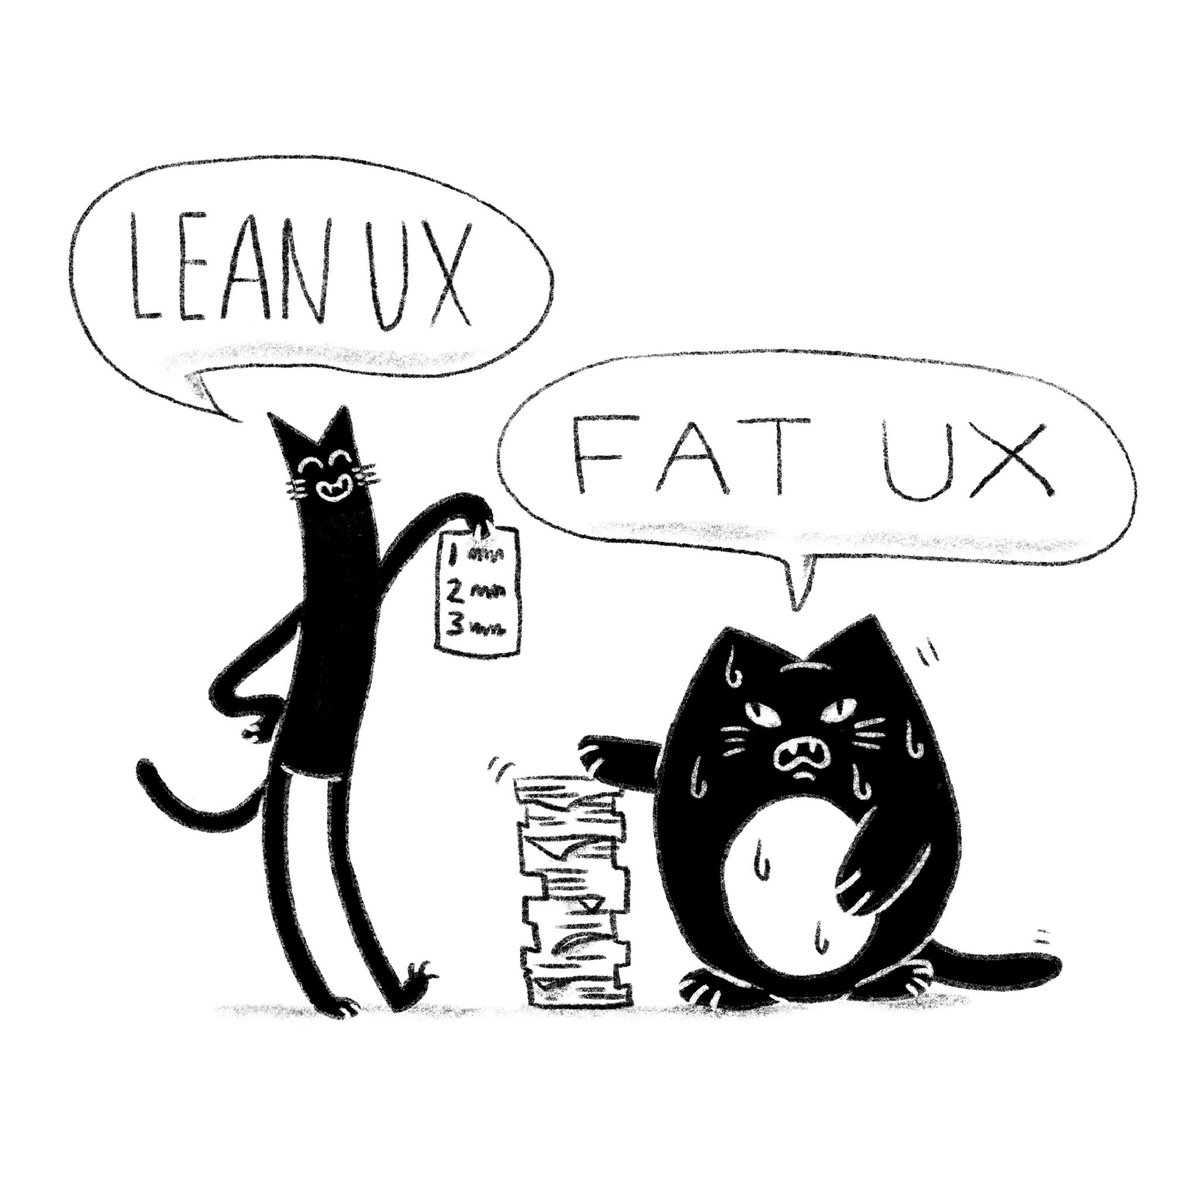 #leanux Lean UX vs fat UX #ux #cats 

(from UX for Cats)